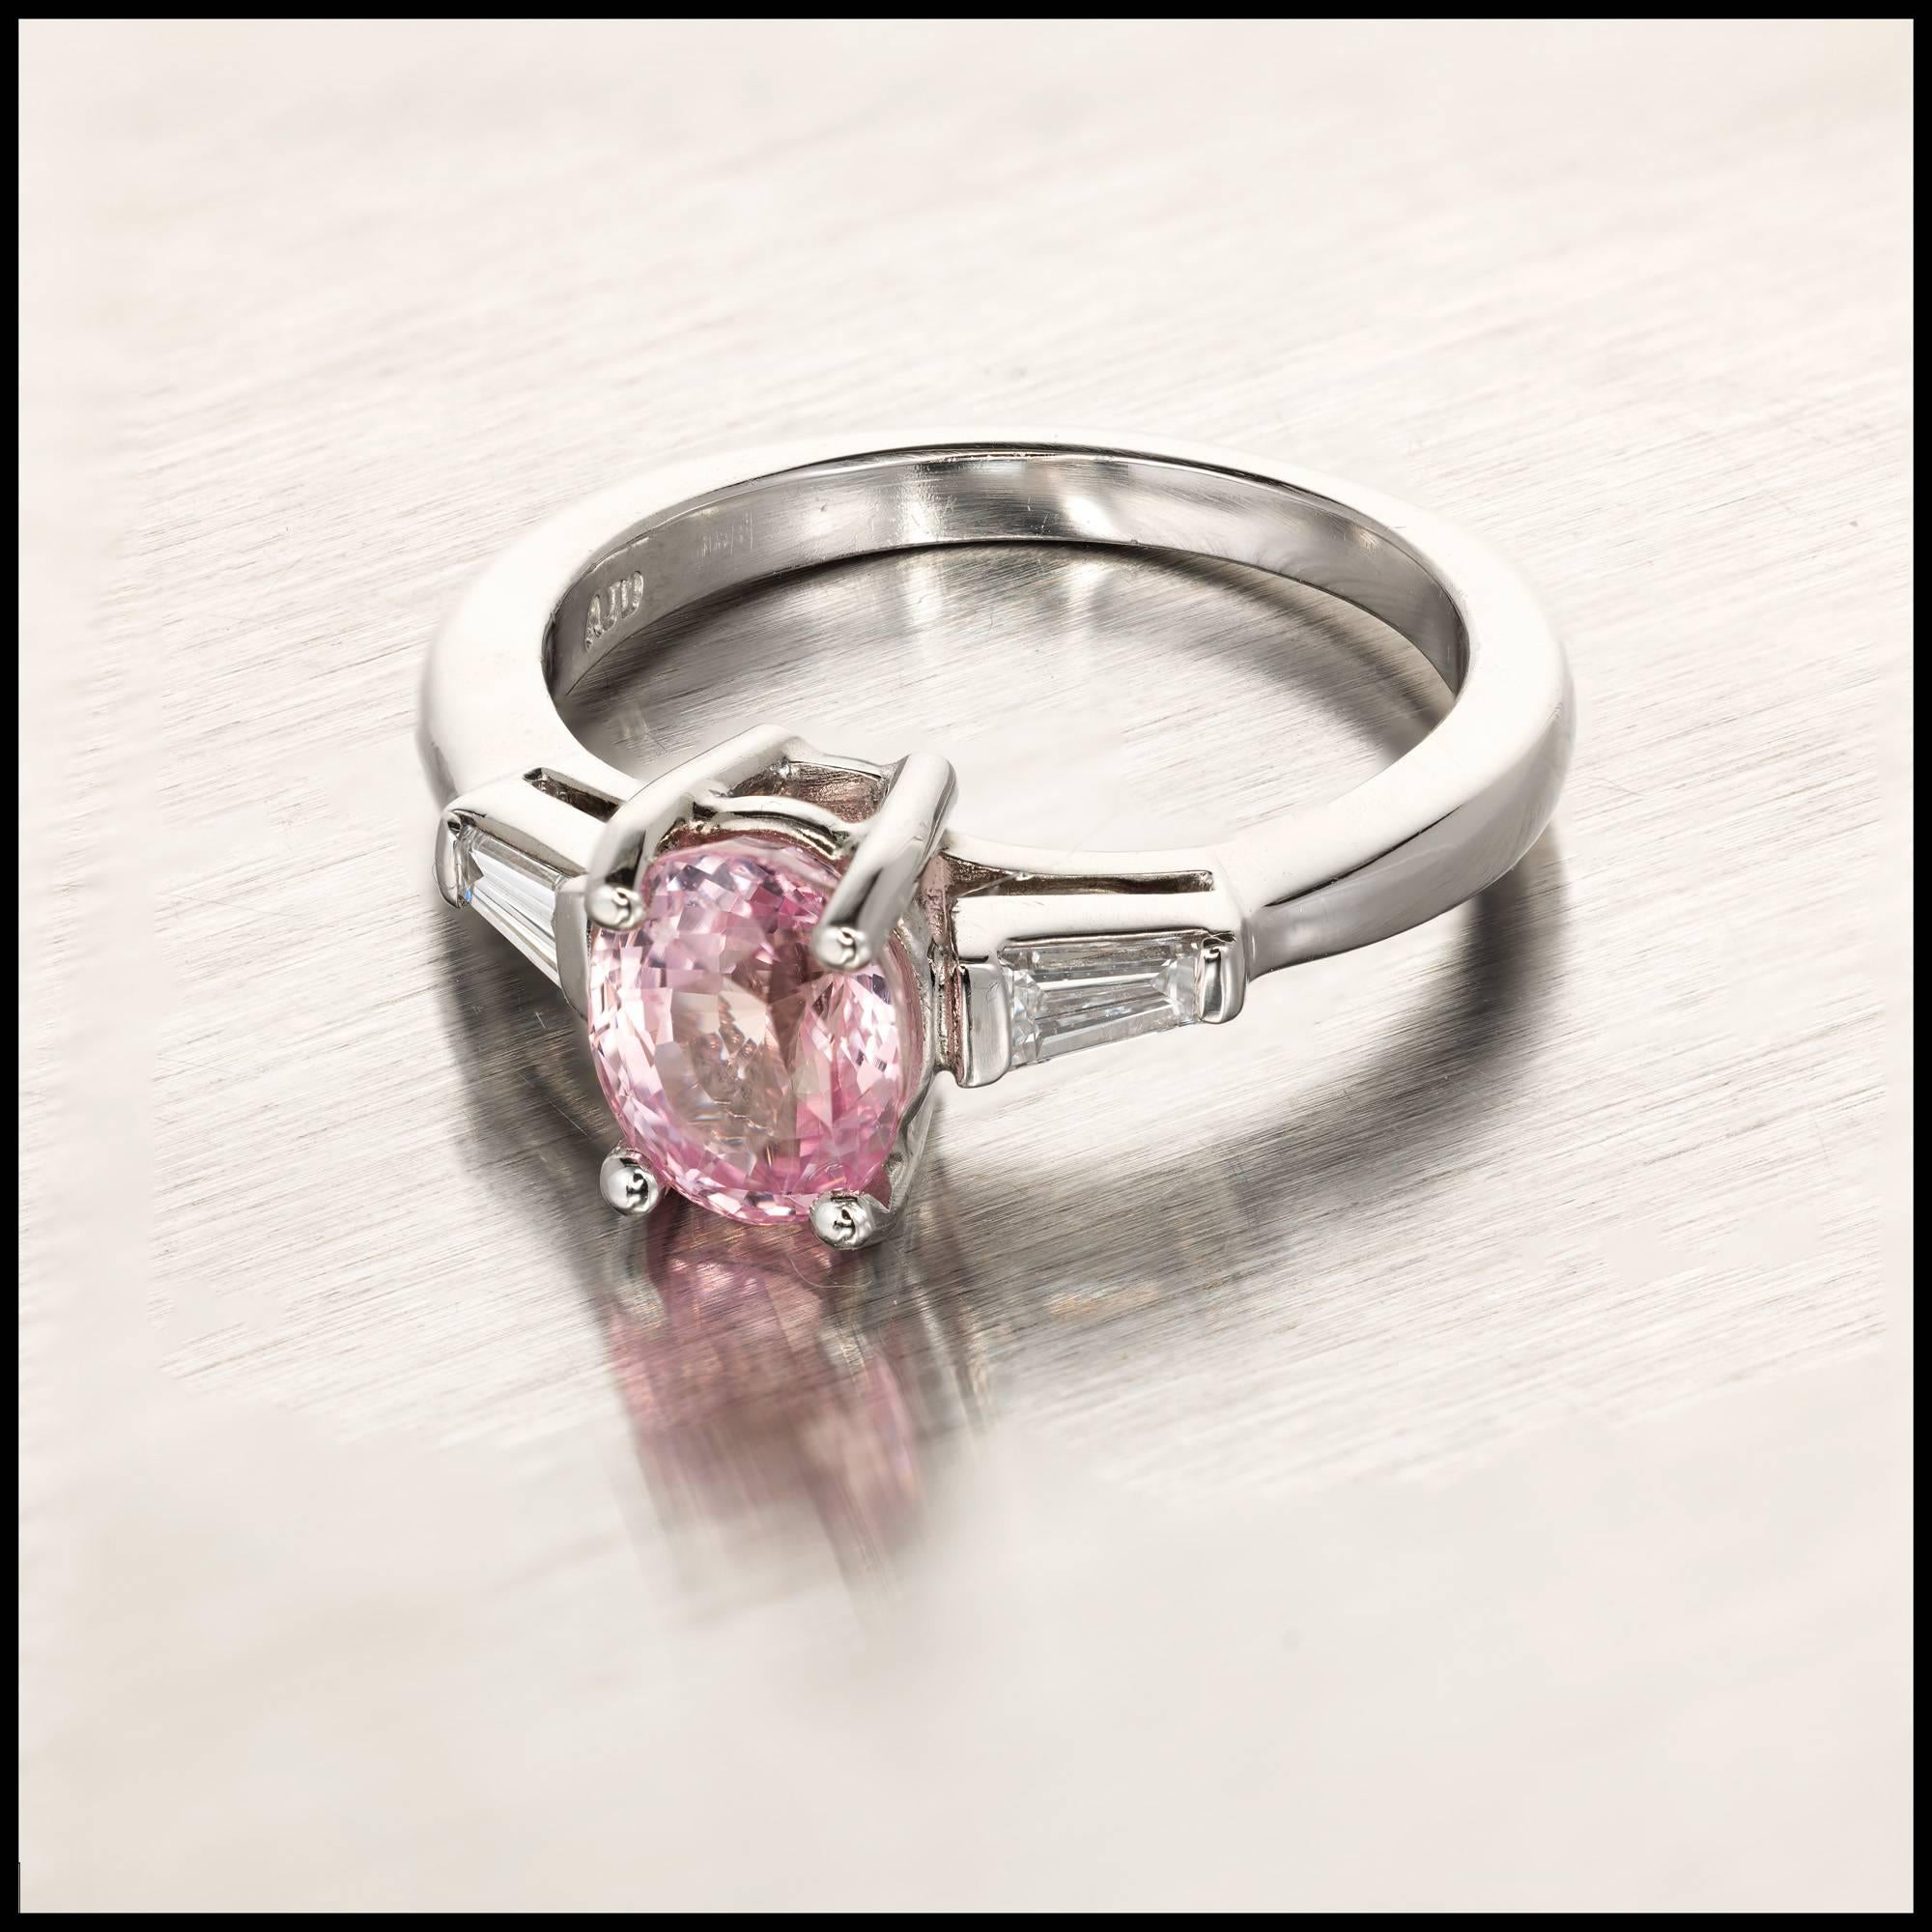 Oval Cut GIA Certified 1.65 Carat Natural Pink Sapphire Diamond Platinum Engagement Ring